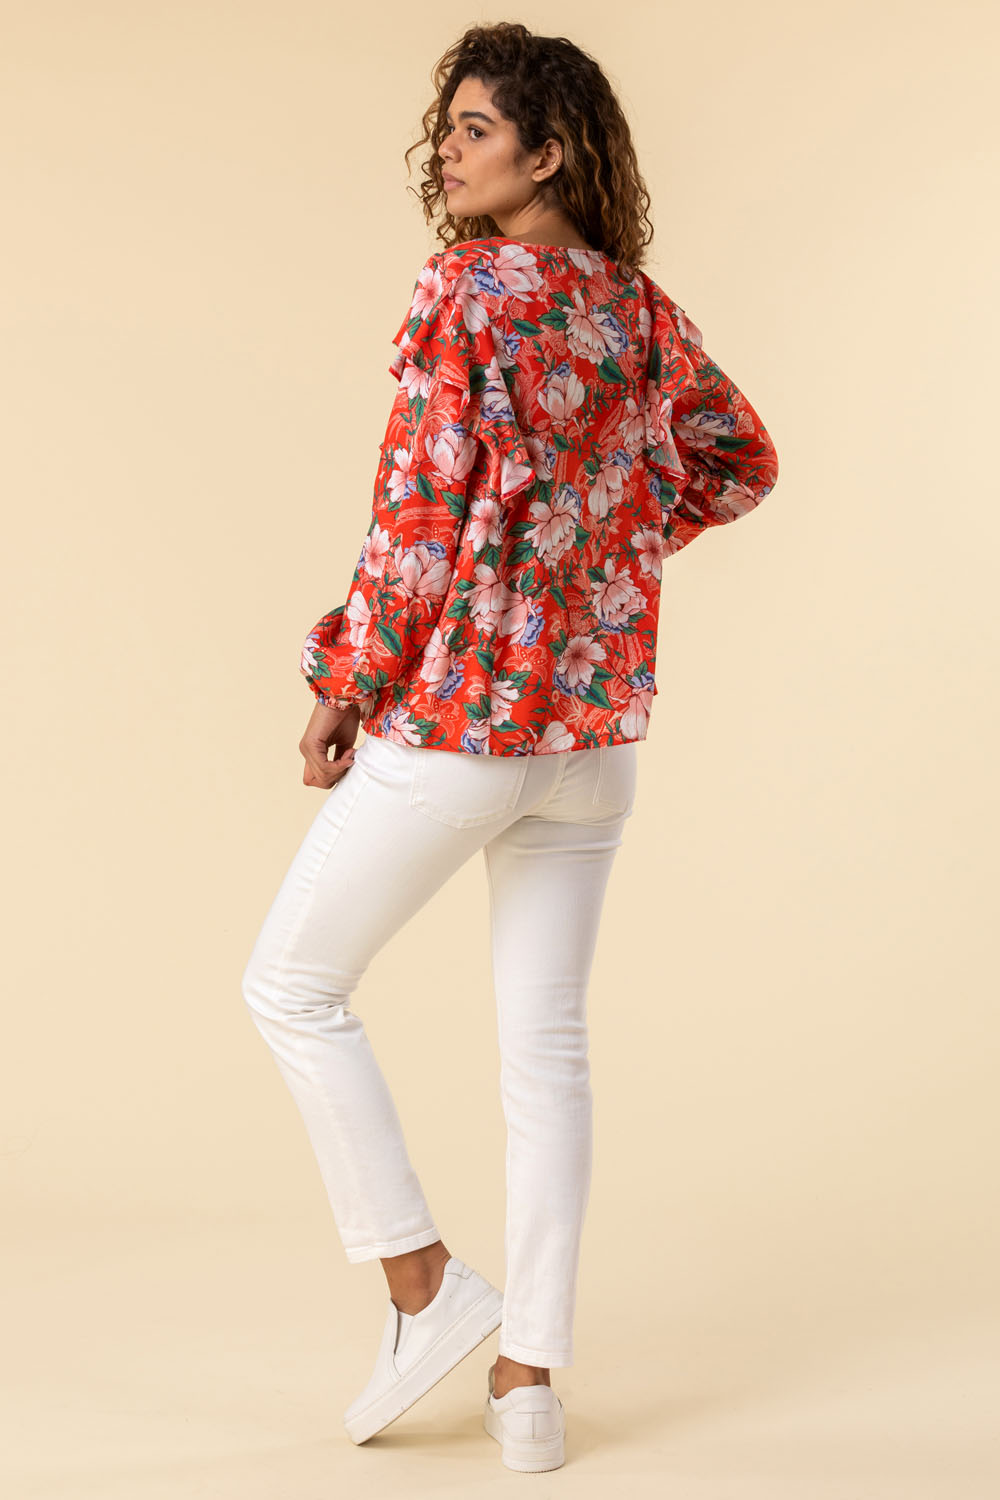 CORAL Floral Paisley Print Frill Sleeve Top, Image 2 of 5